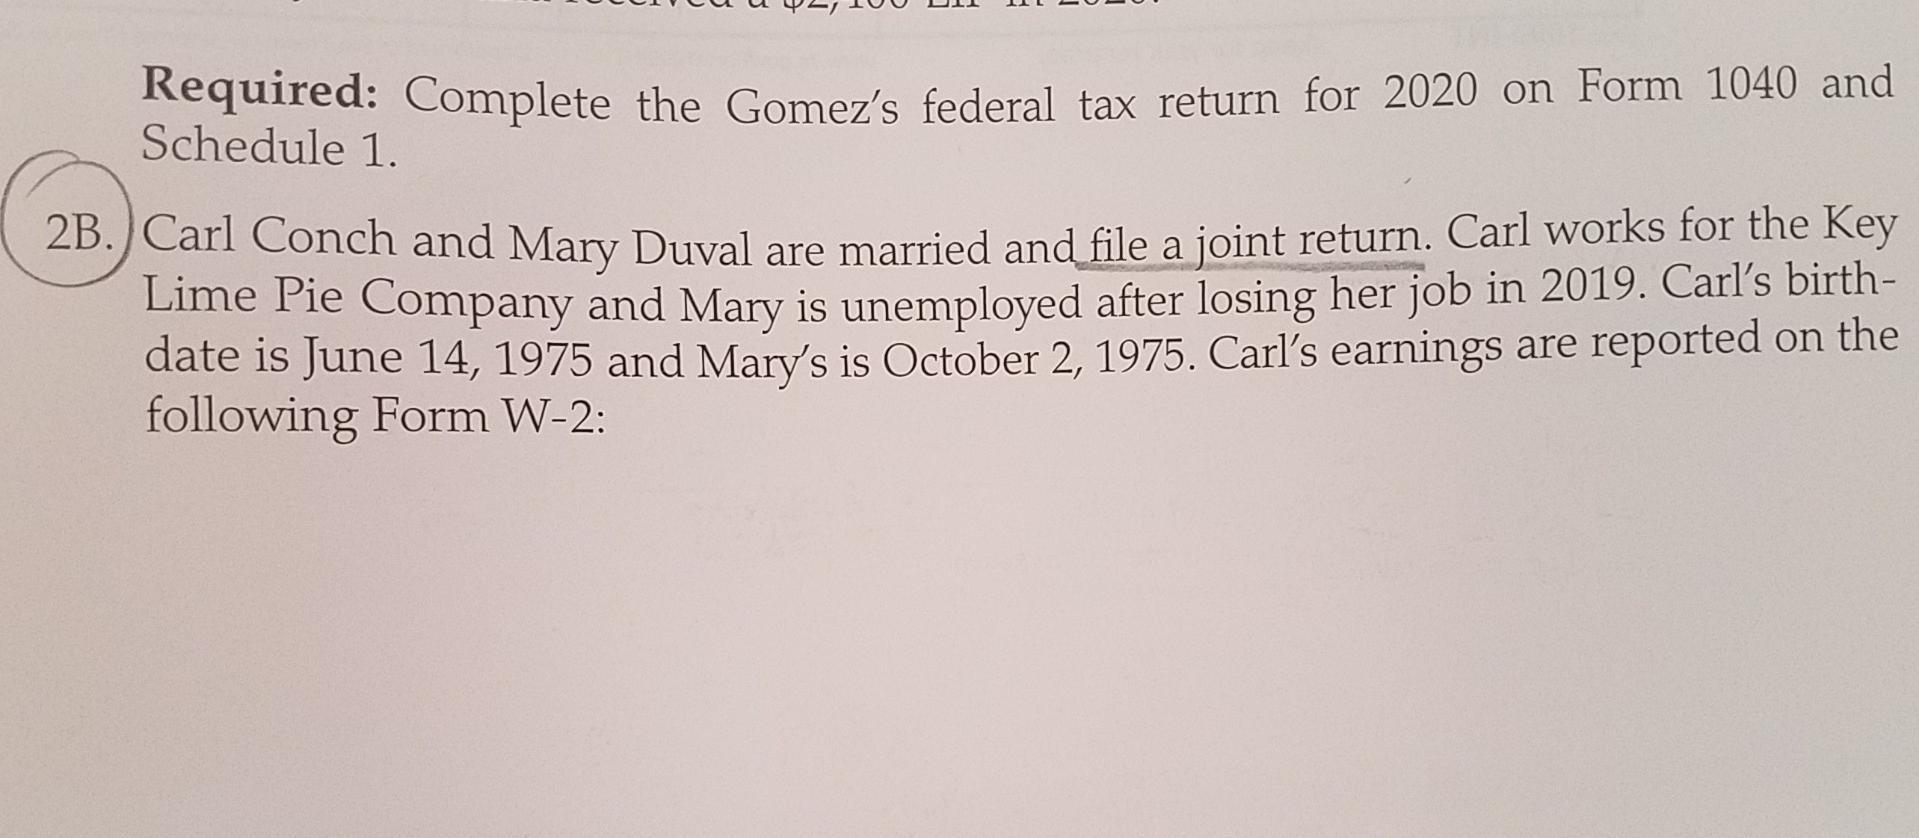 Required: Complete the Gomezs federal tax return for 2020 on Form 1040 and Schedule 1. 2B.) Carl Conch and Mary Duval are ma